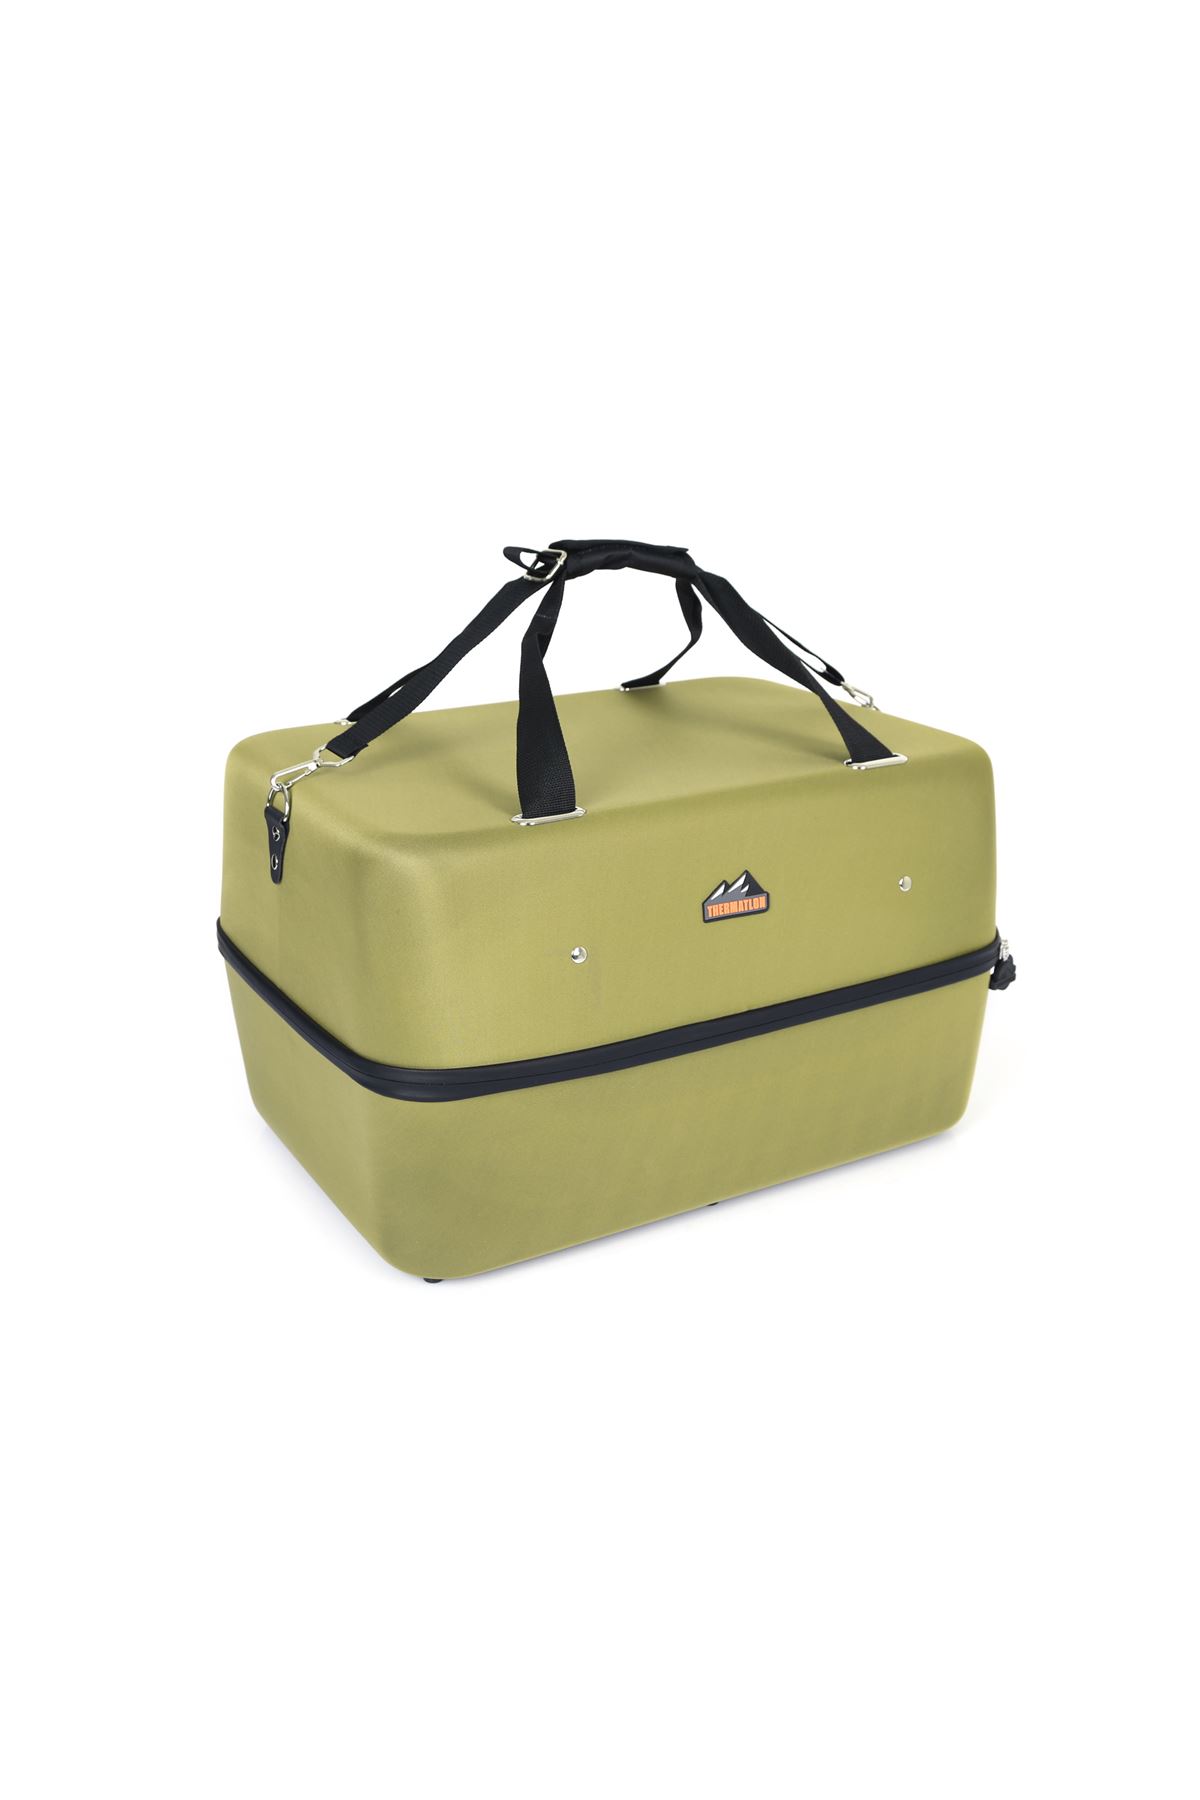 Thermatlon Camping Cooler 28 LT